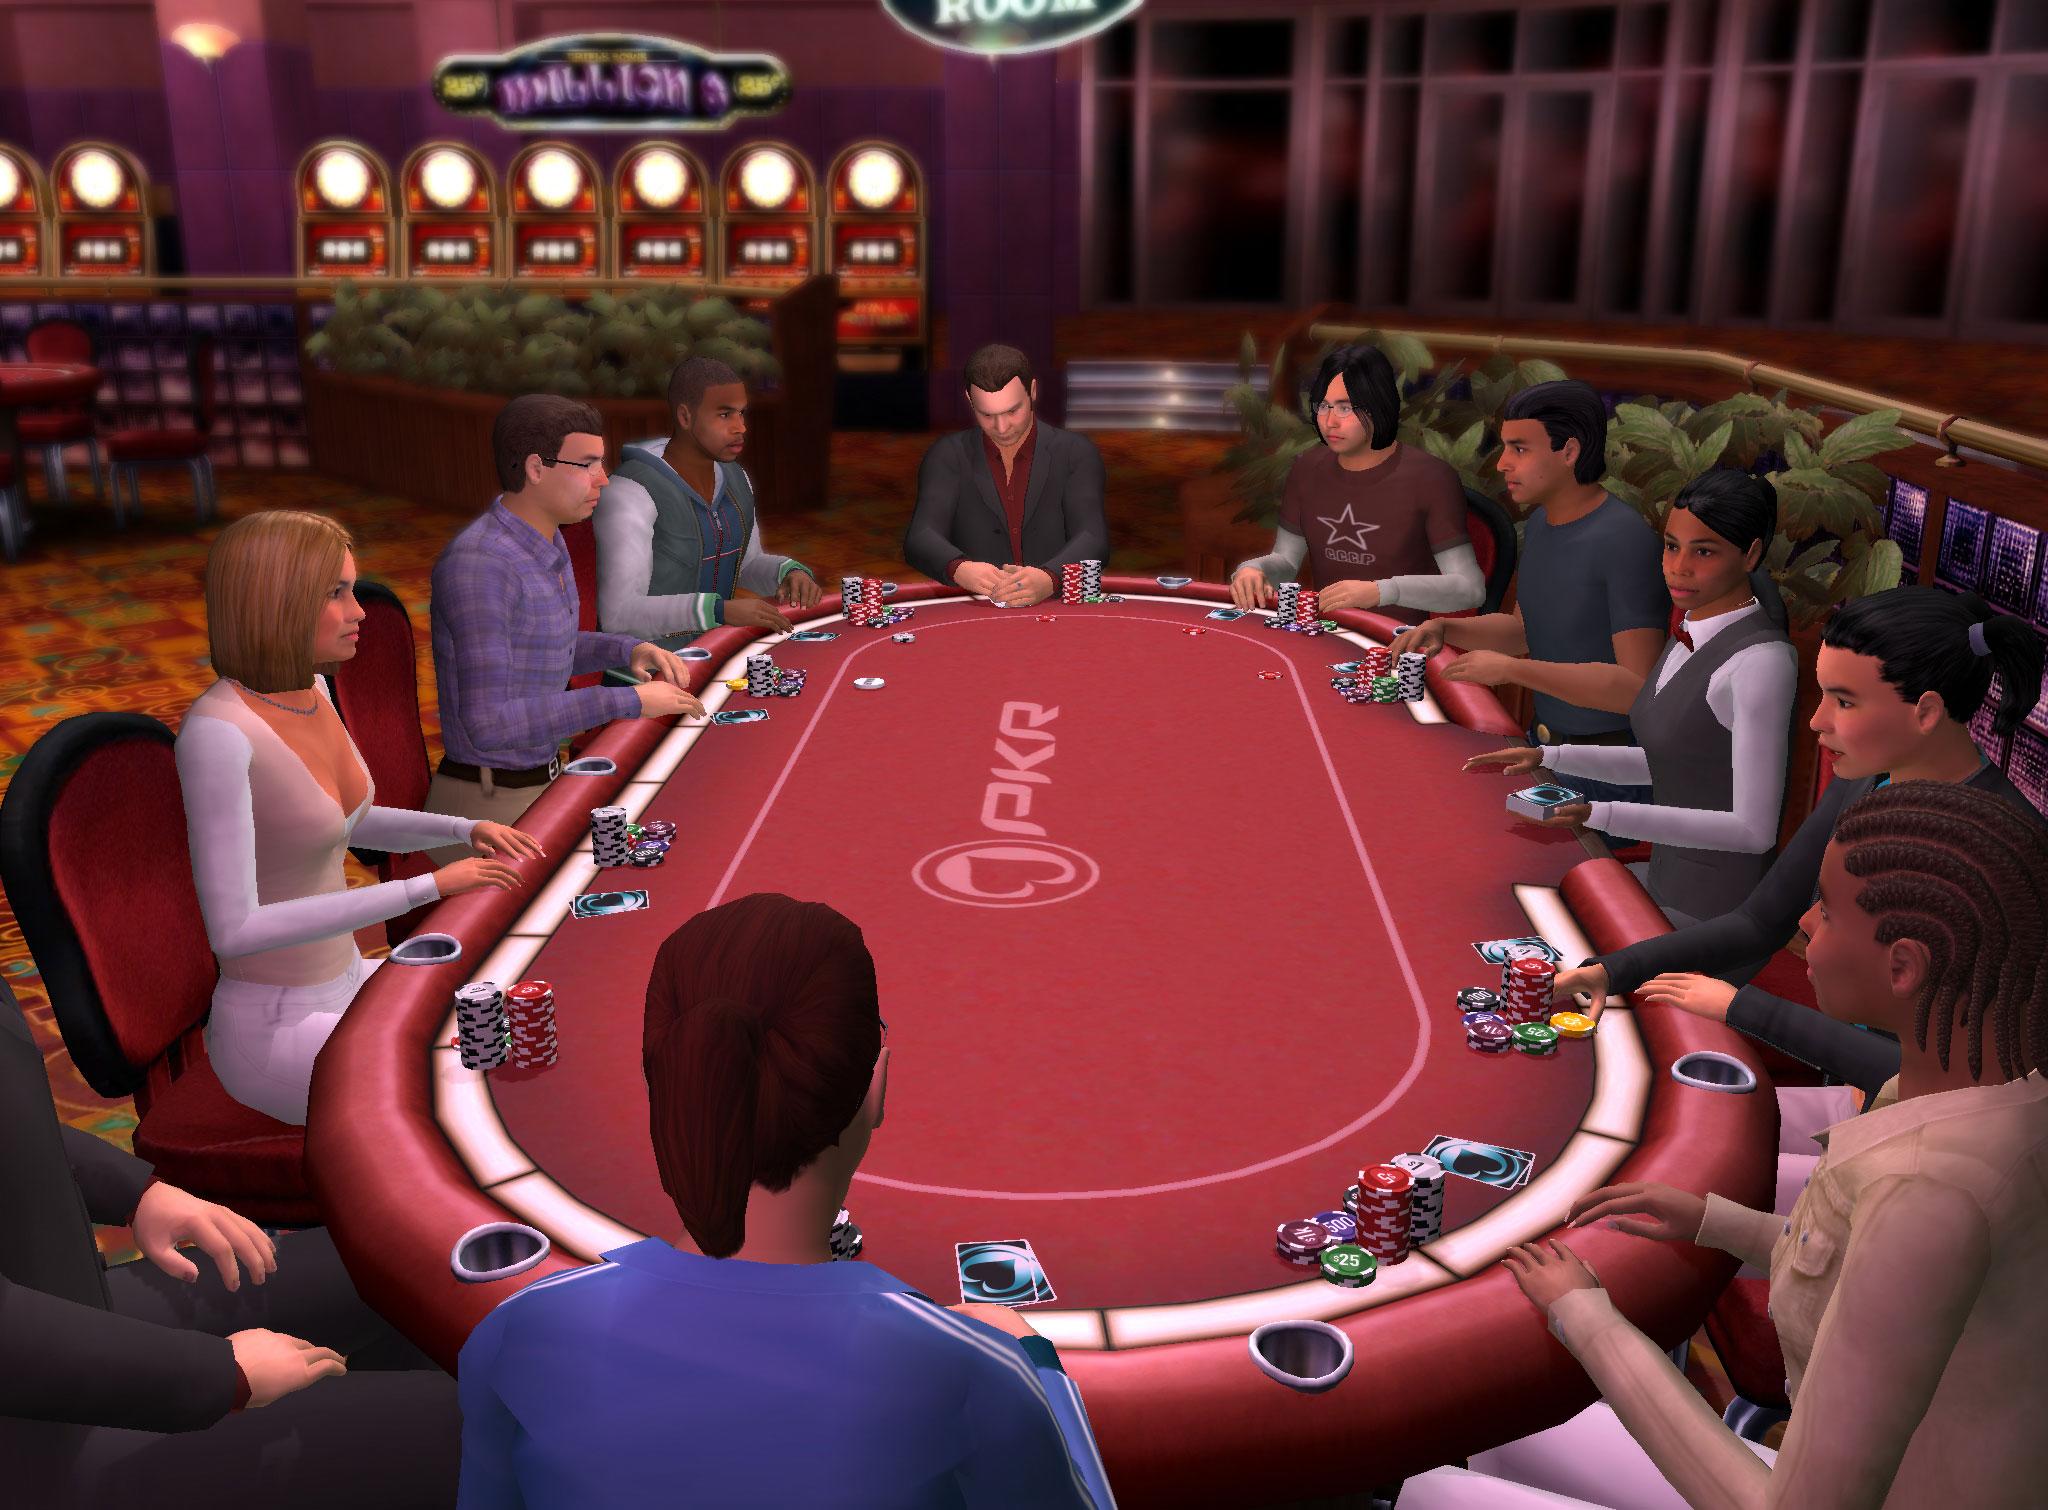 Play poker online, free no real money instantly